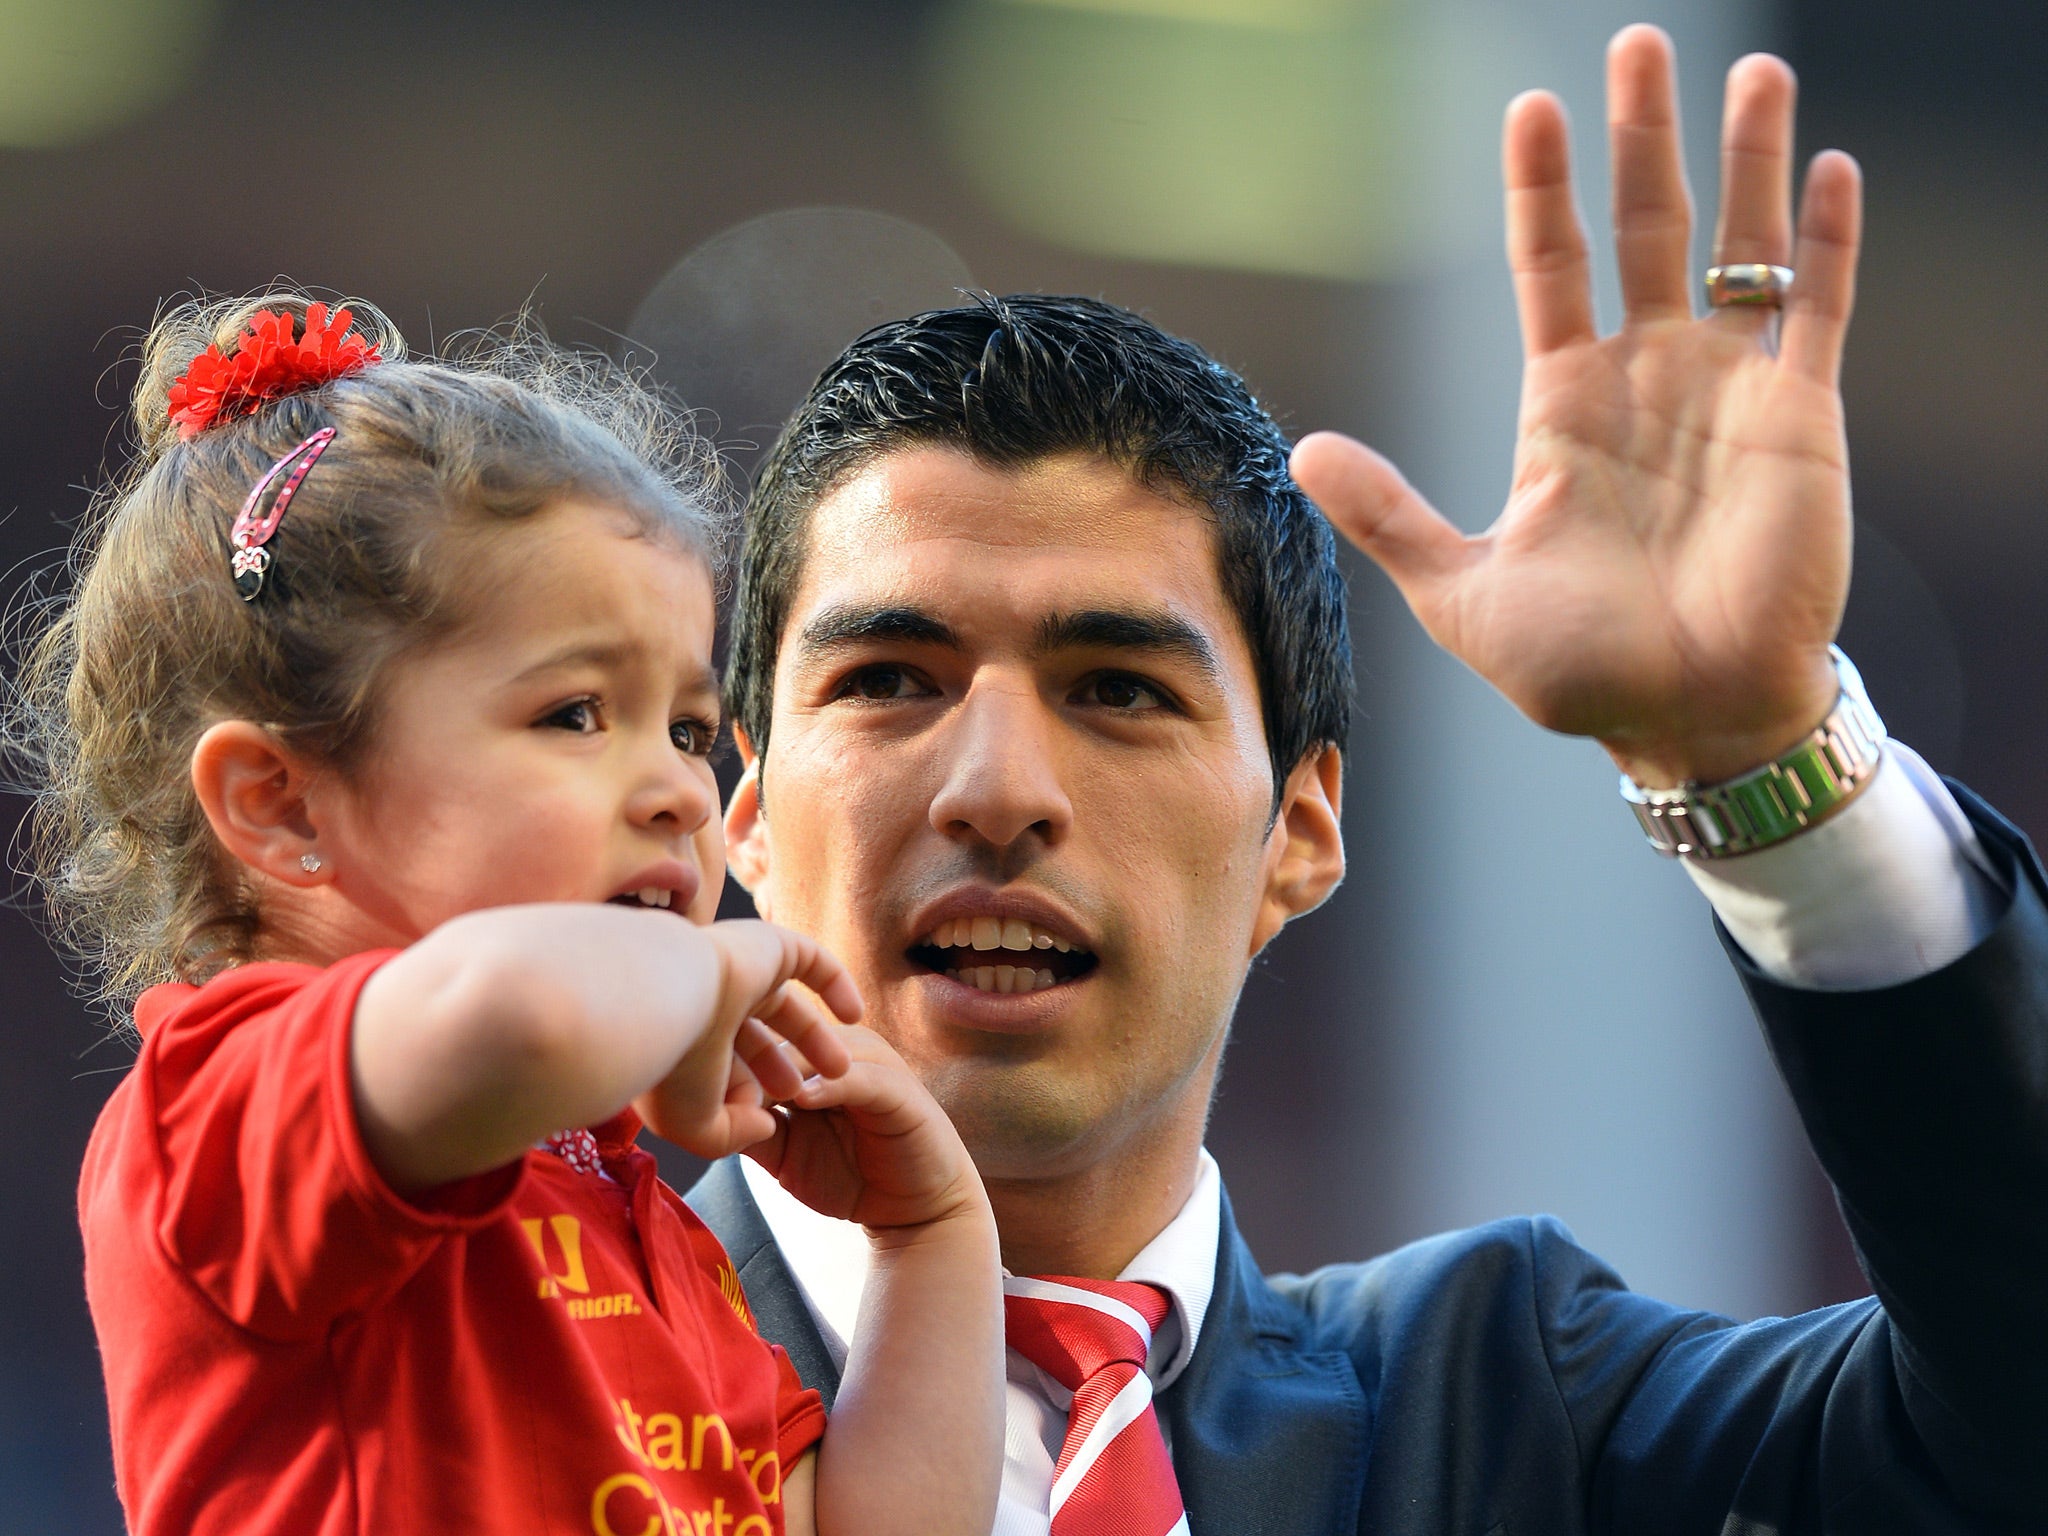 Luis Suarez pictured at Anfield on the last day of the season